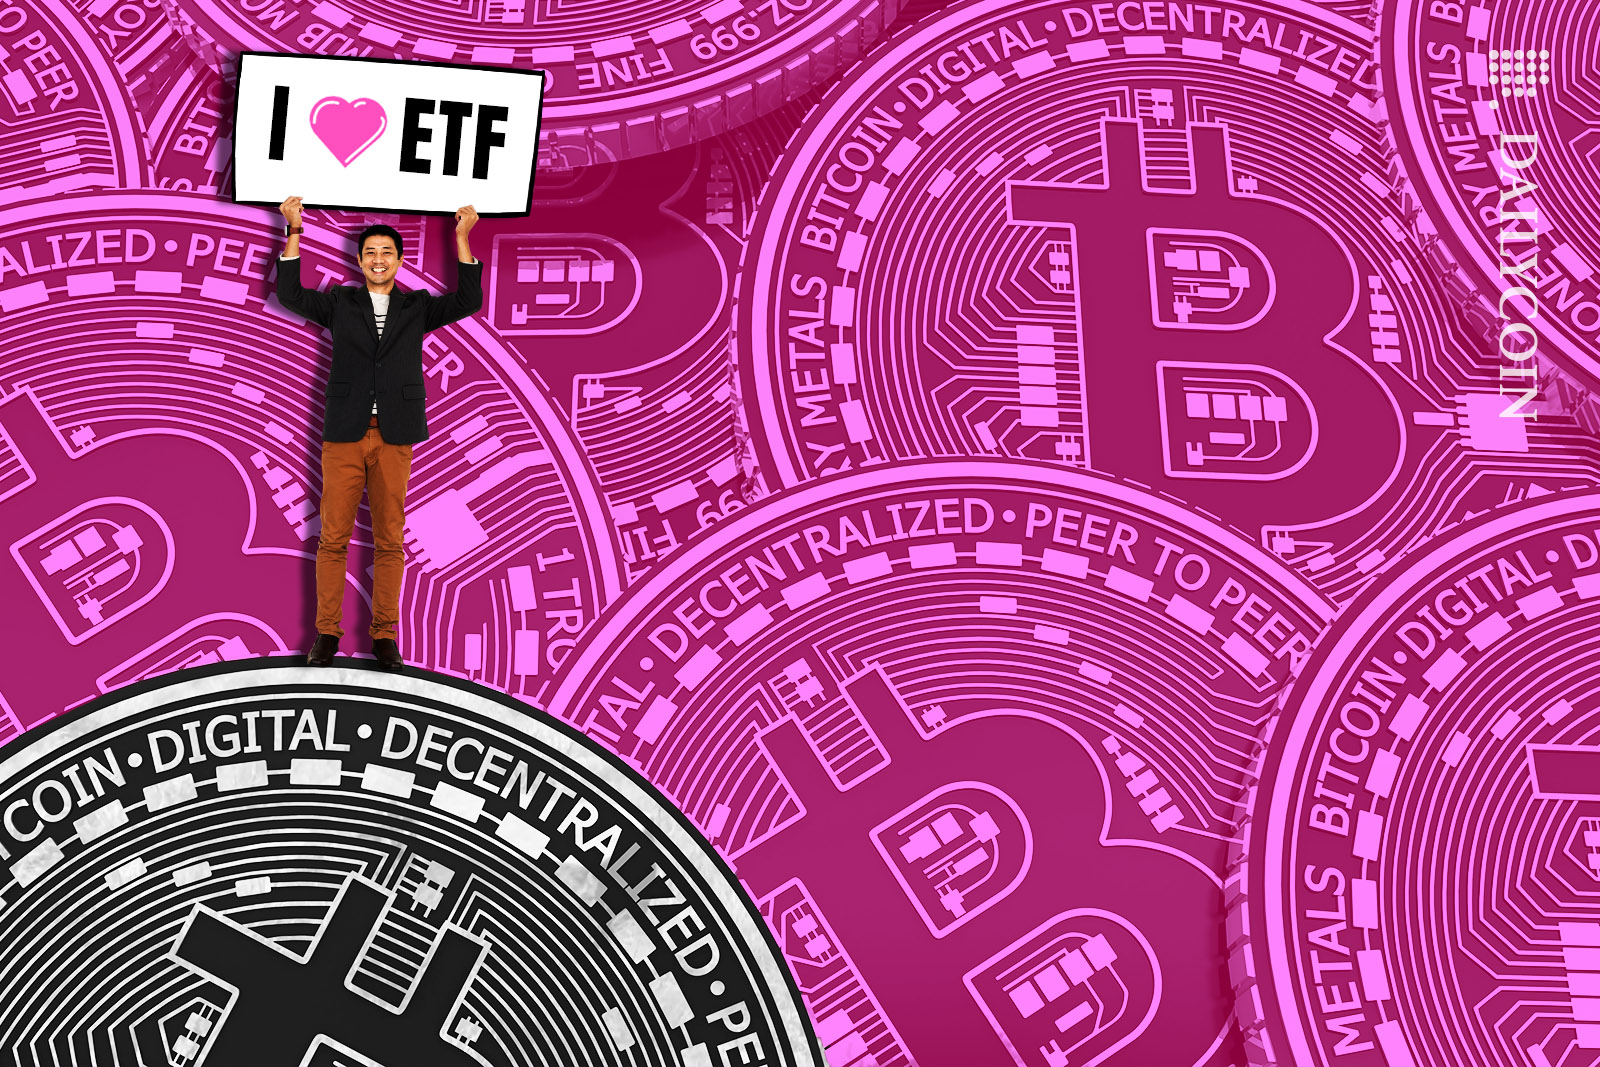 Crypto expert standing on Bitcoins holding ''I love ETF'' sign.